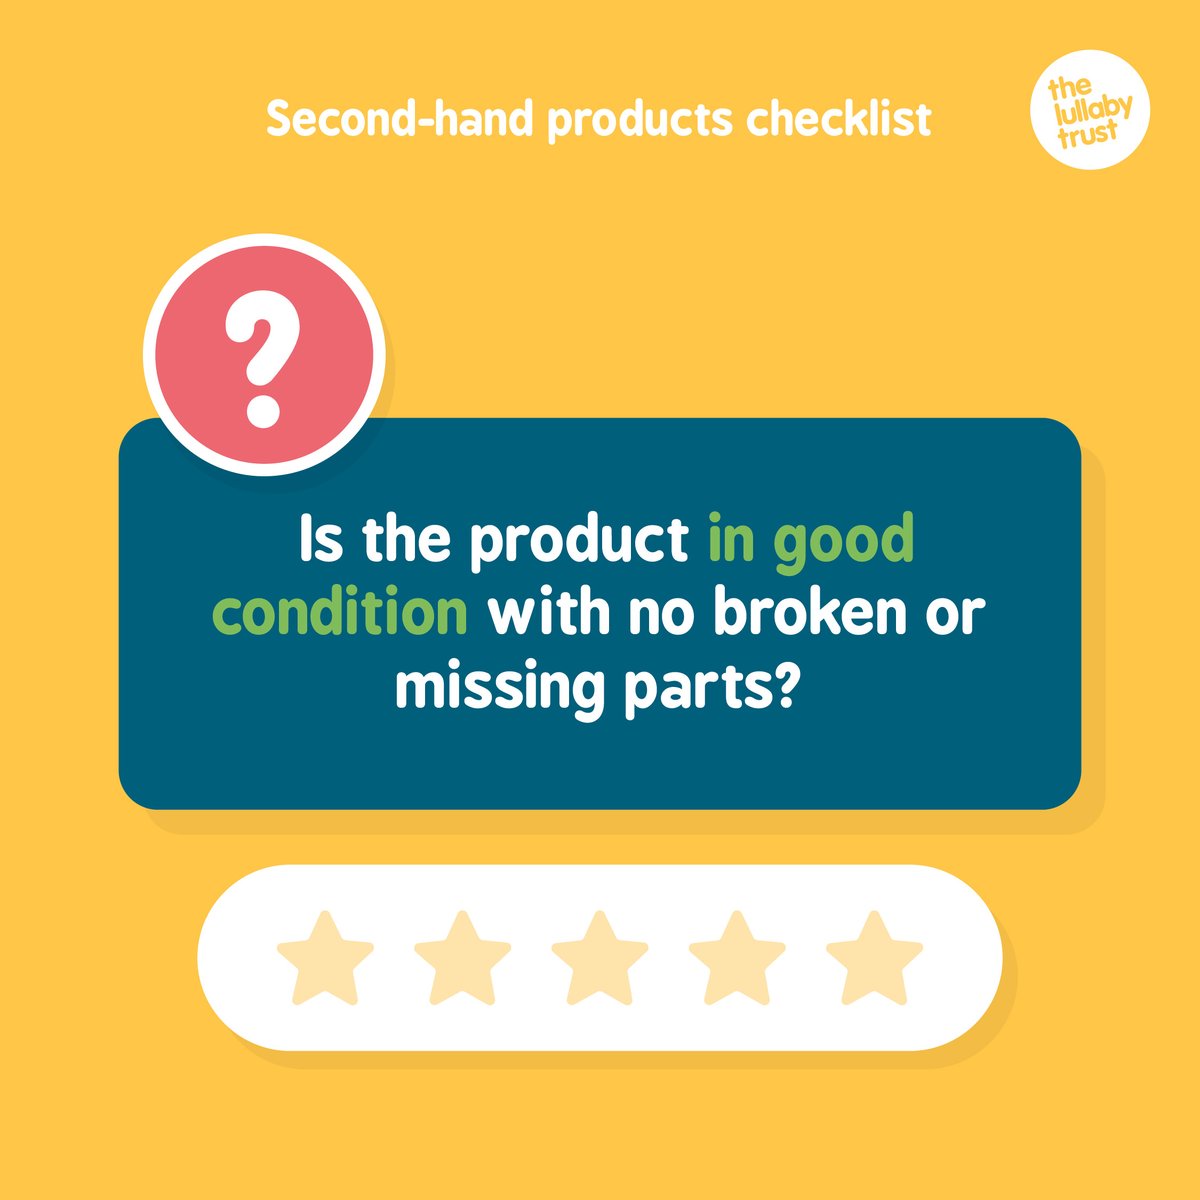 Given or buying second-hand items? Only use if you can answer ‘yes’ to all the questions in this checklist (see images).